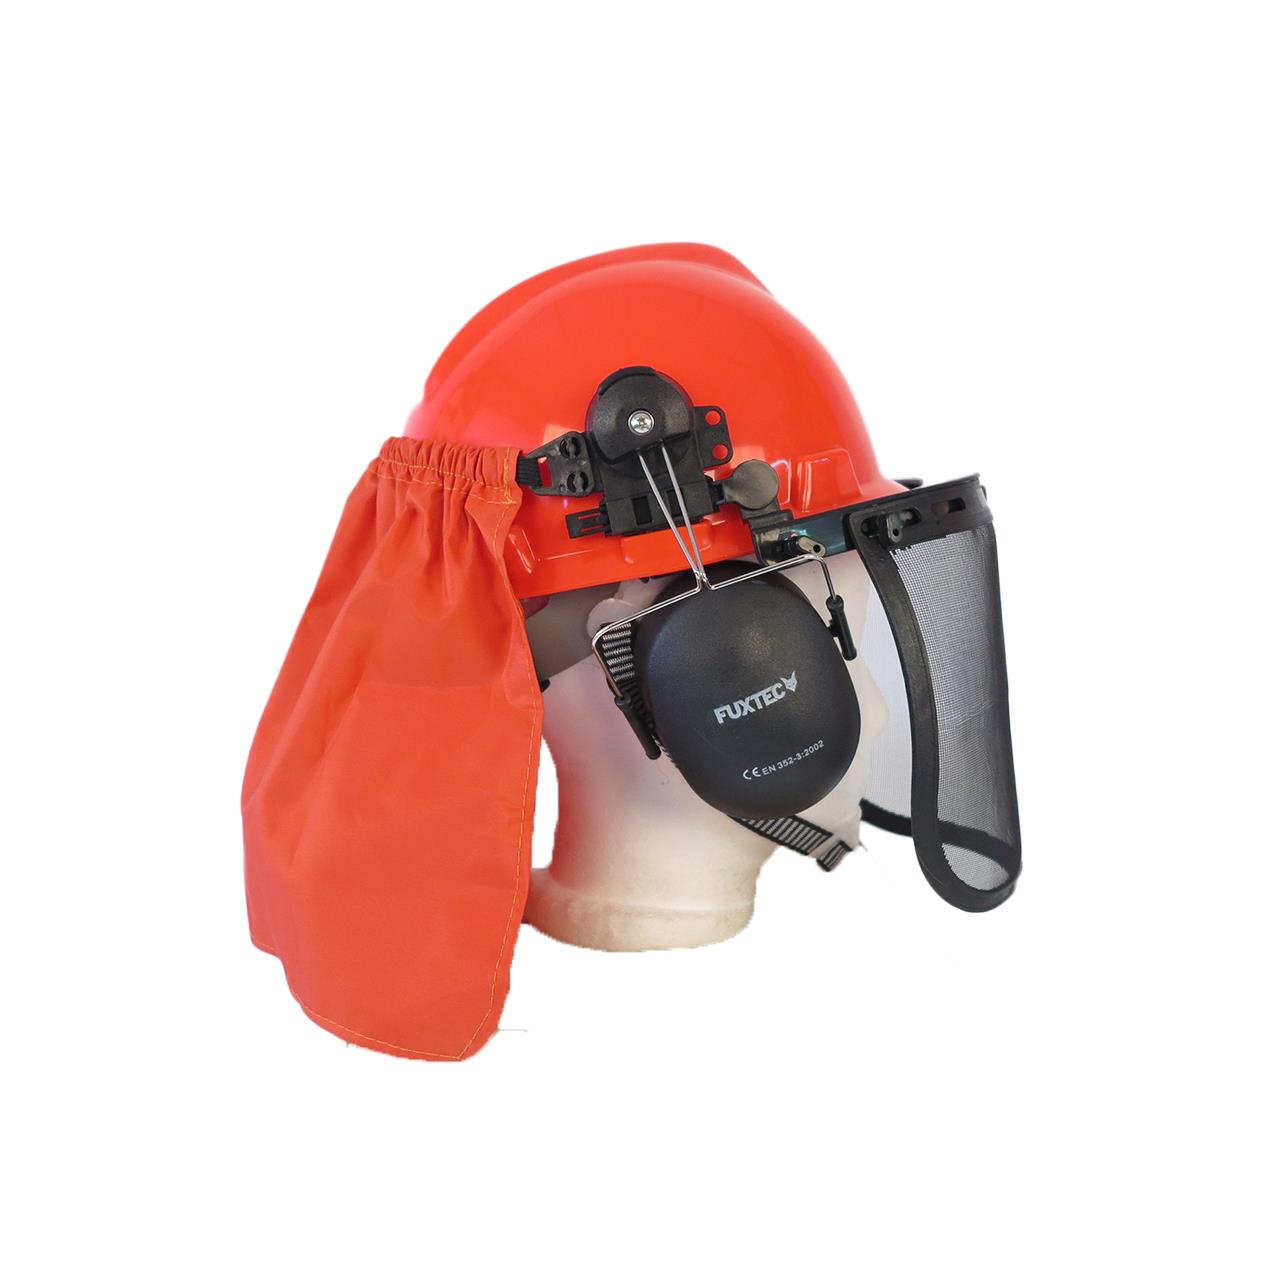 FUXTEC safety helmet with neck guard and ear defender - workwear / forestry